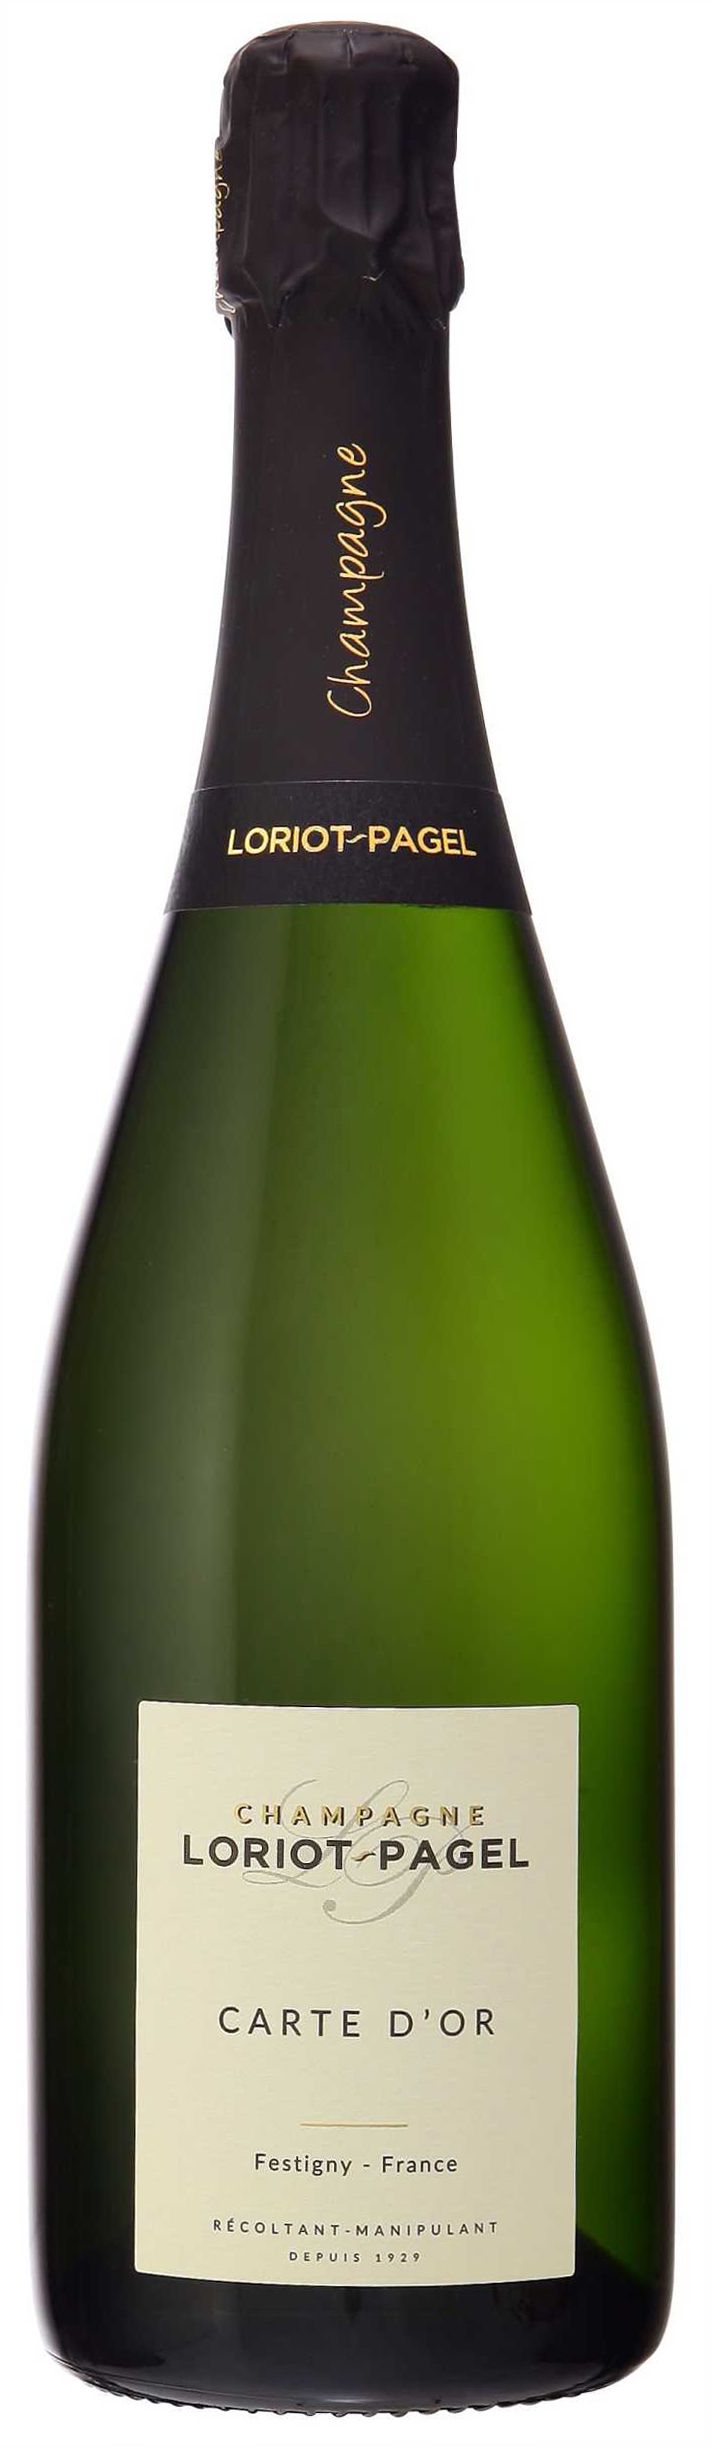 Loriot-Pagel, Carte d'Or Extra Brut